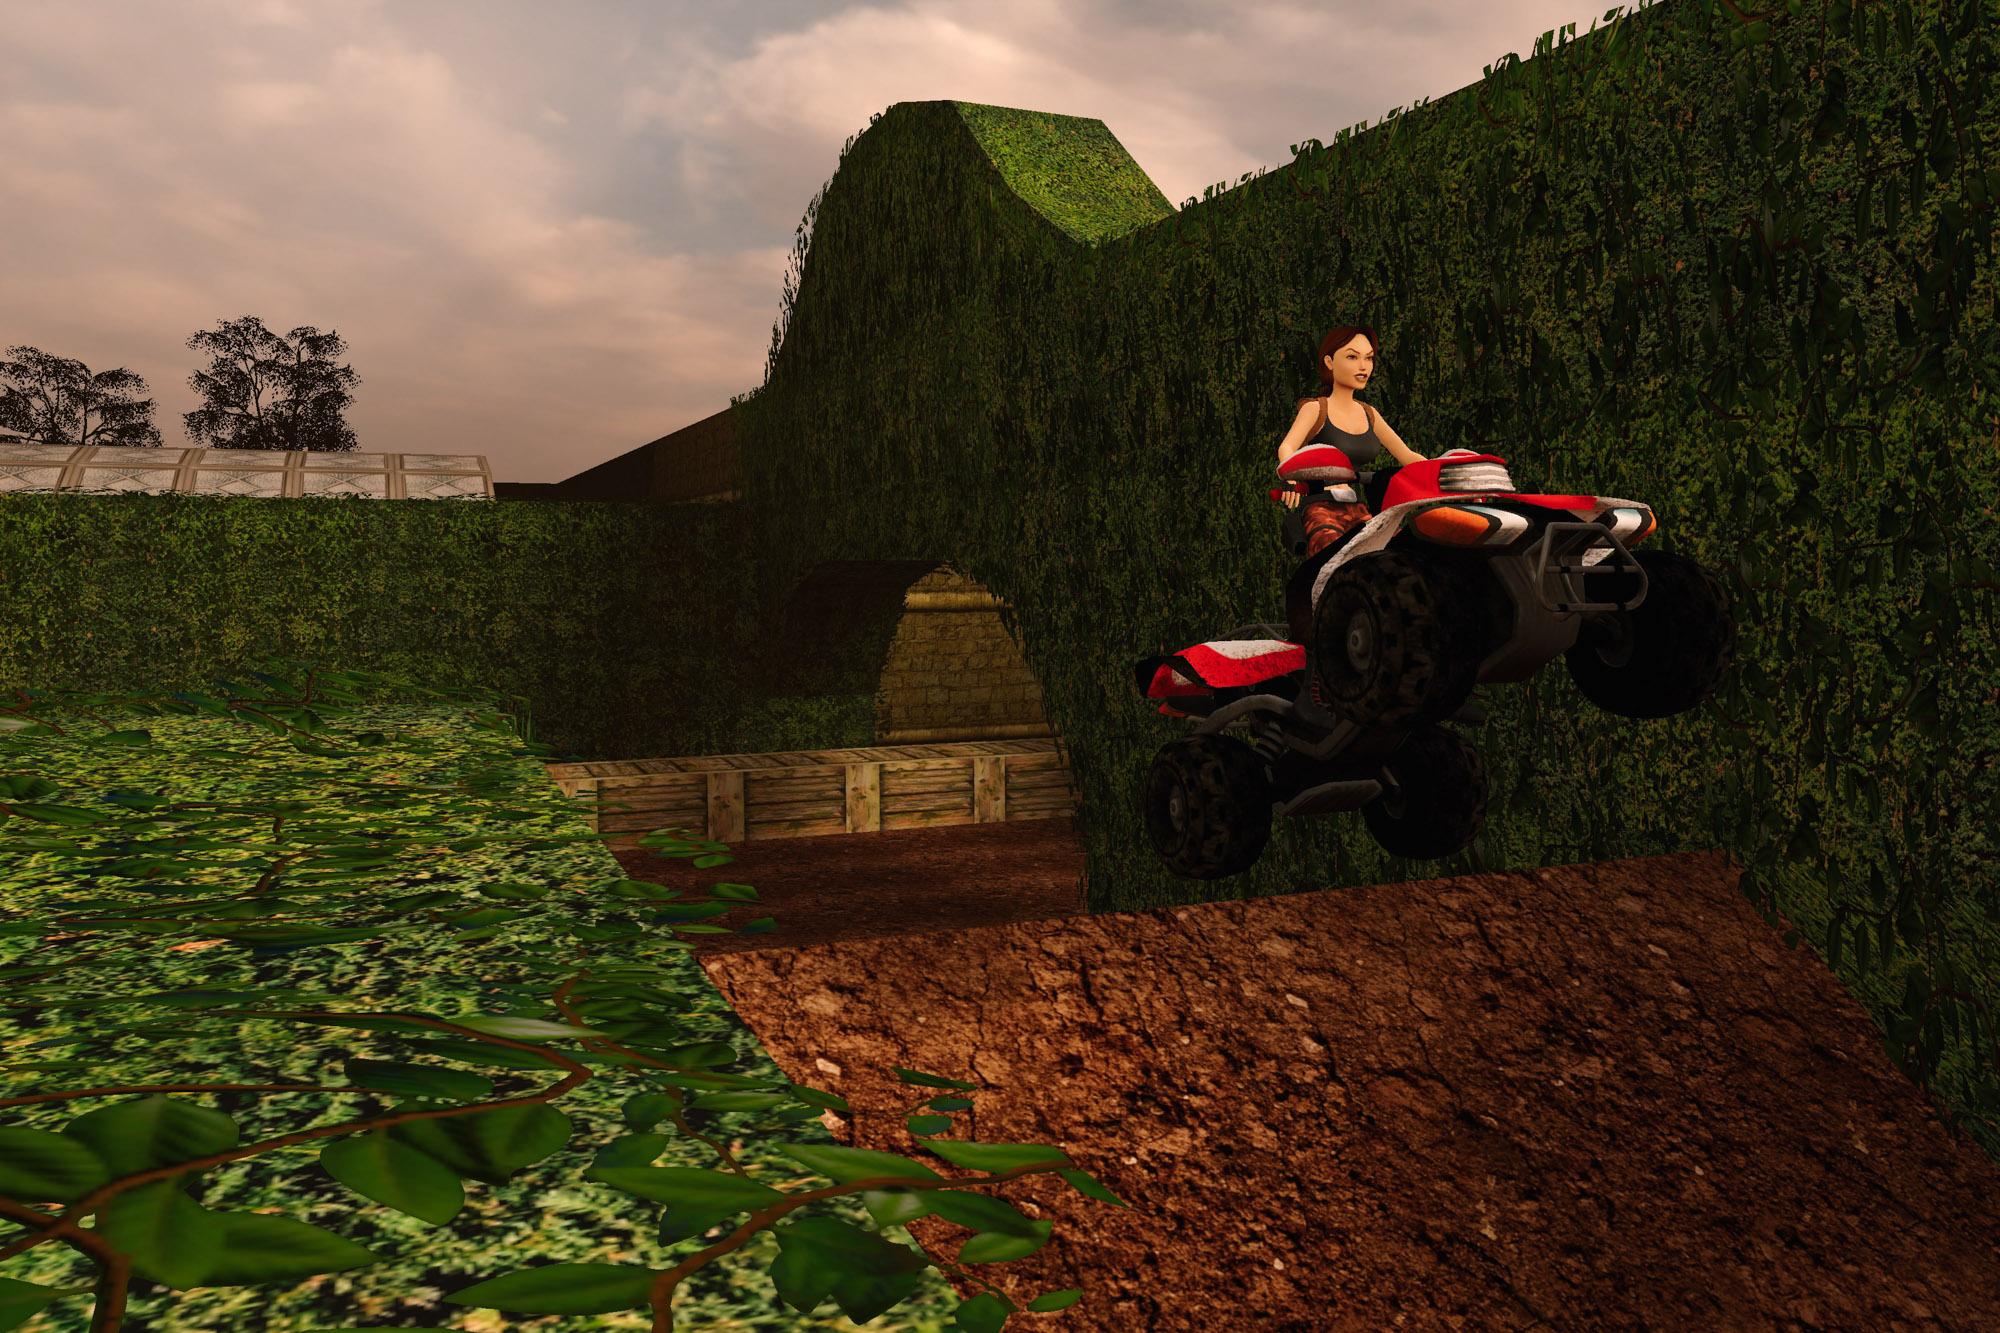 Lara jumping over a slope on a quad bike in the Croft manor's racetrack